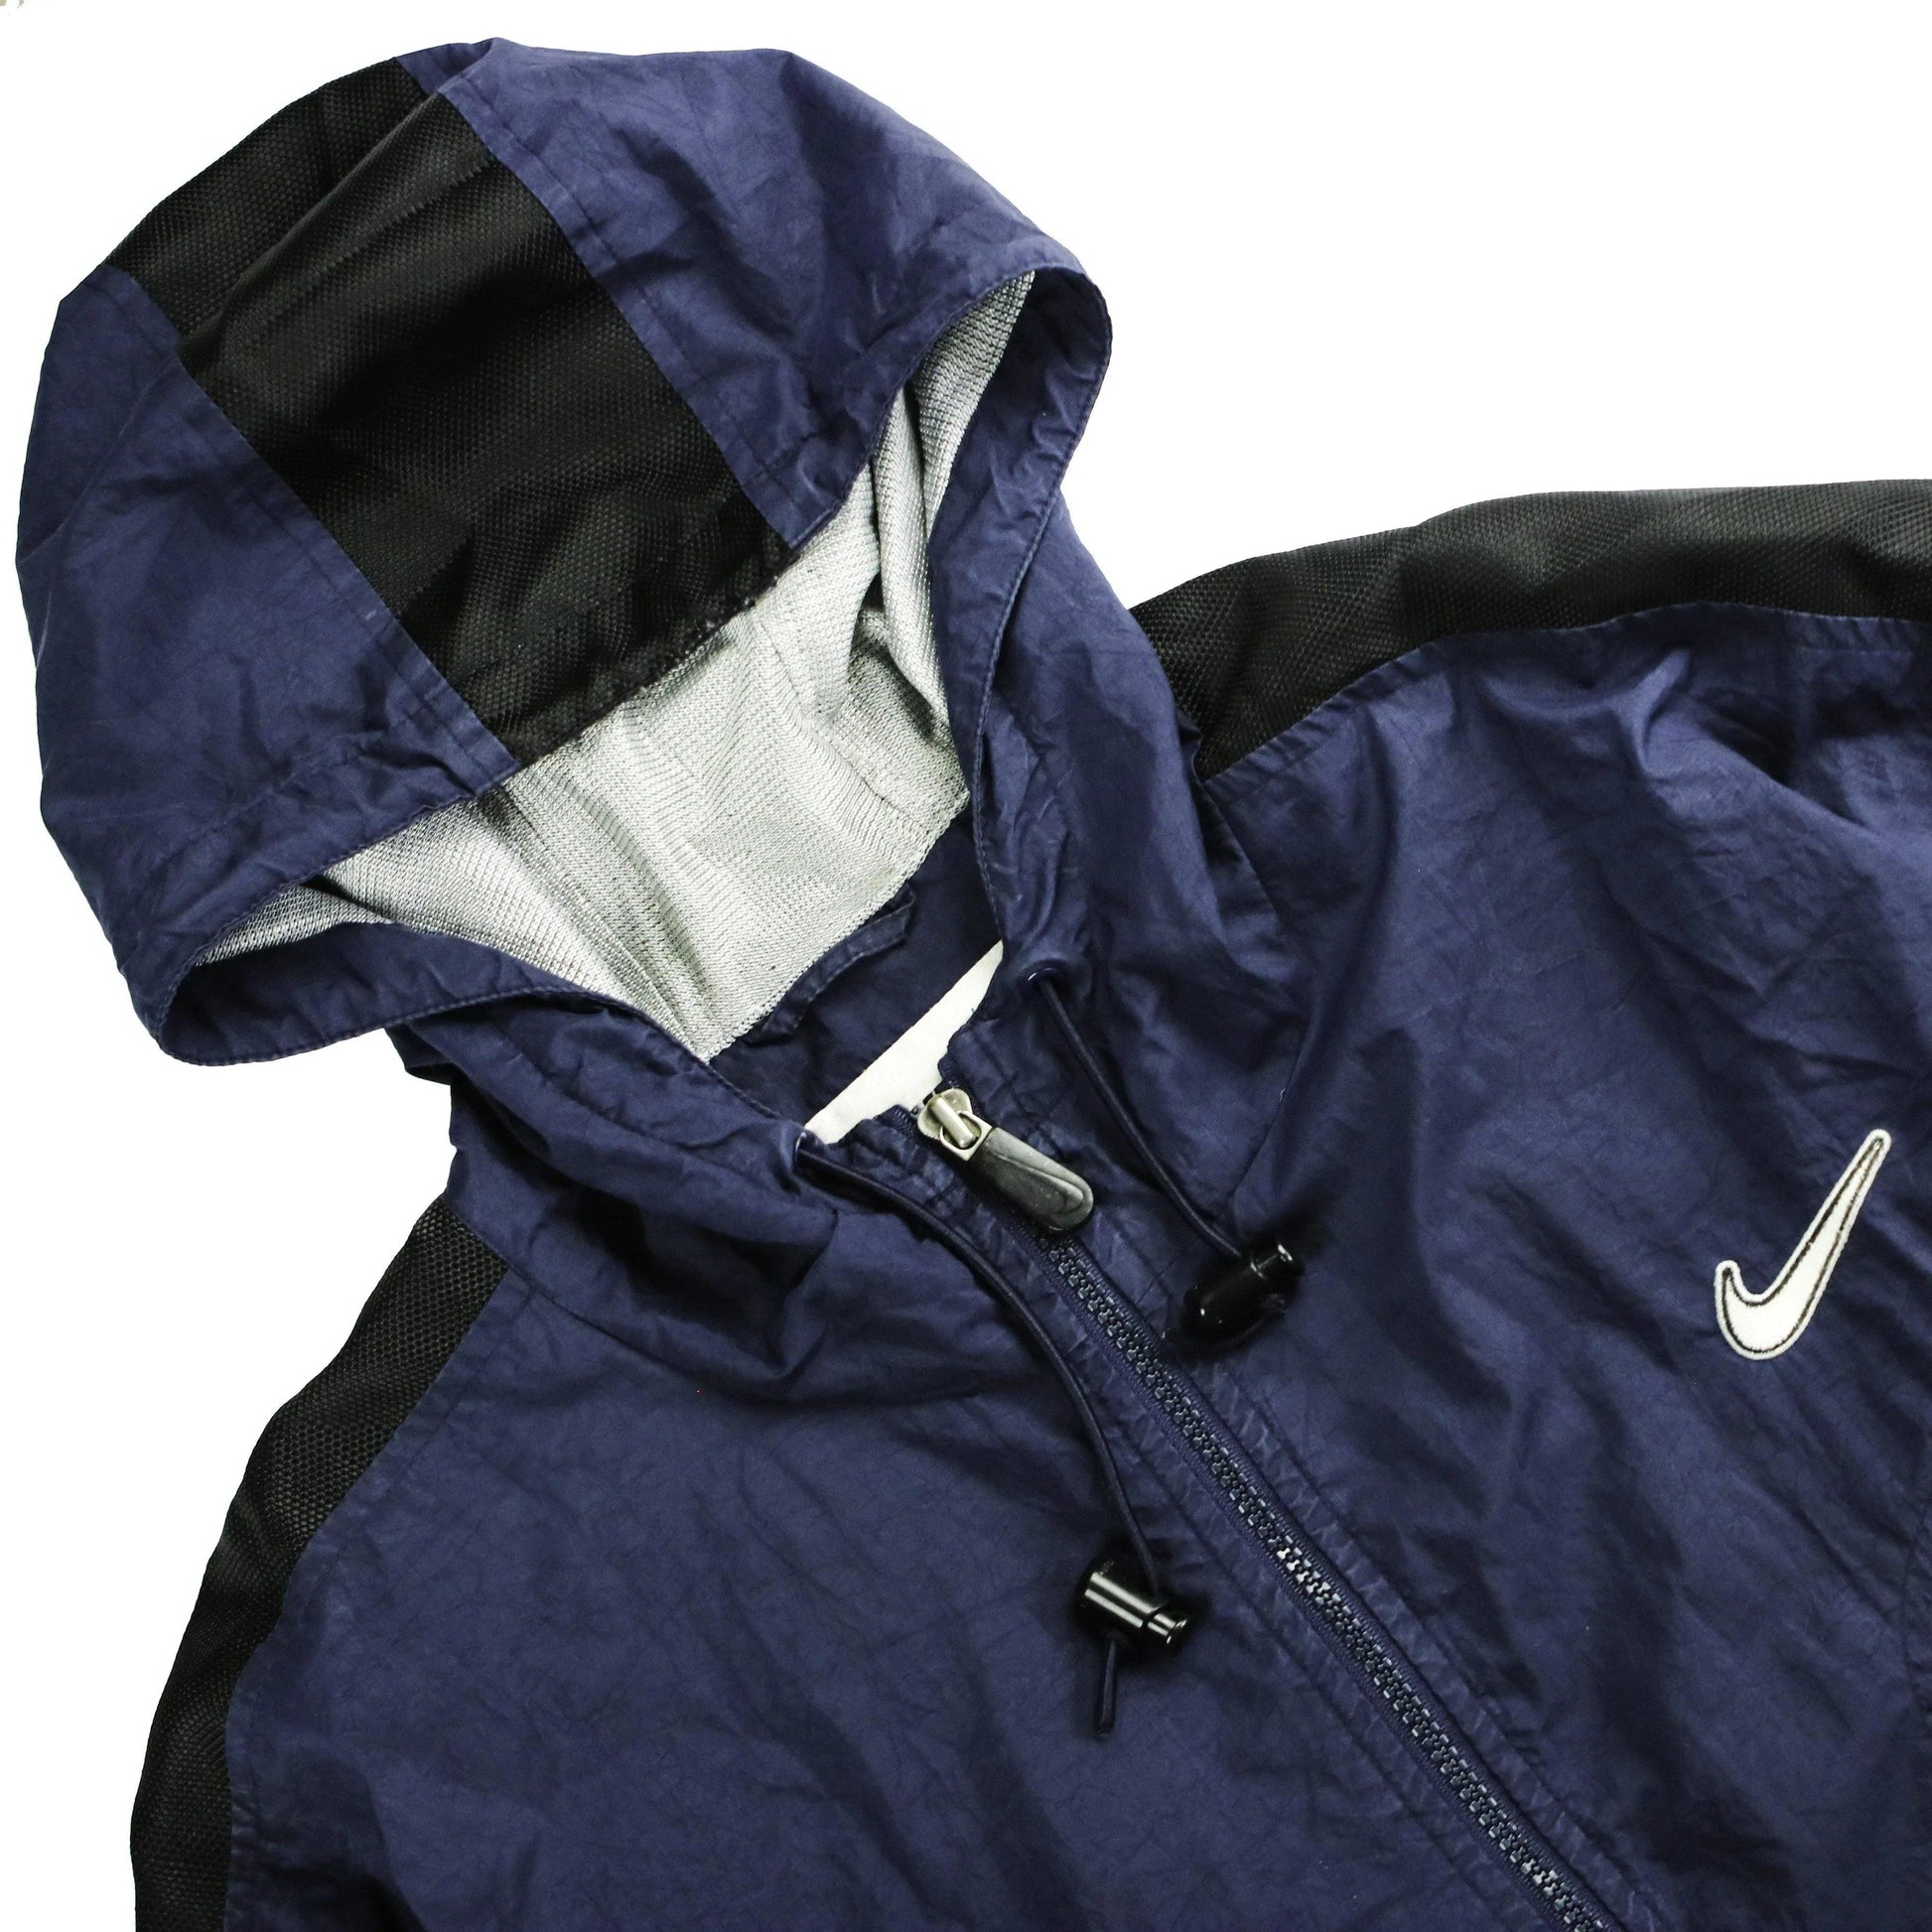 NIKE SWOOSH SPELLOUT JACKET (L) - Known Source